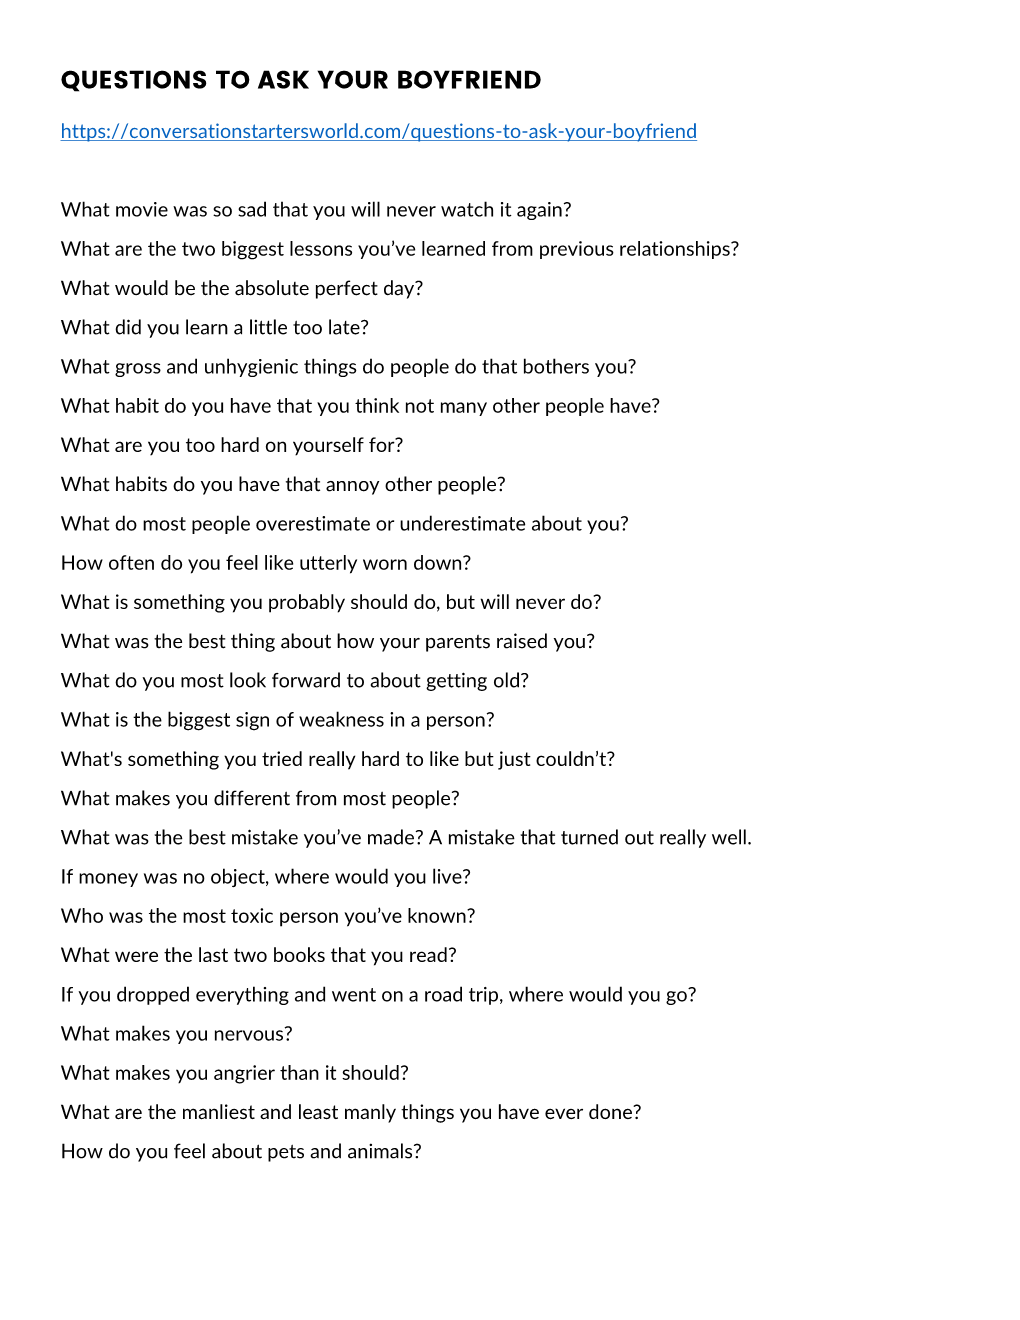 PDF of All of Our Questions to Ask Your Boyfriend